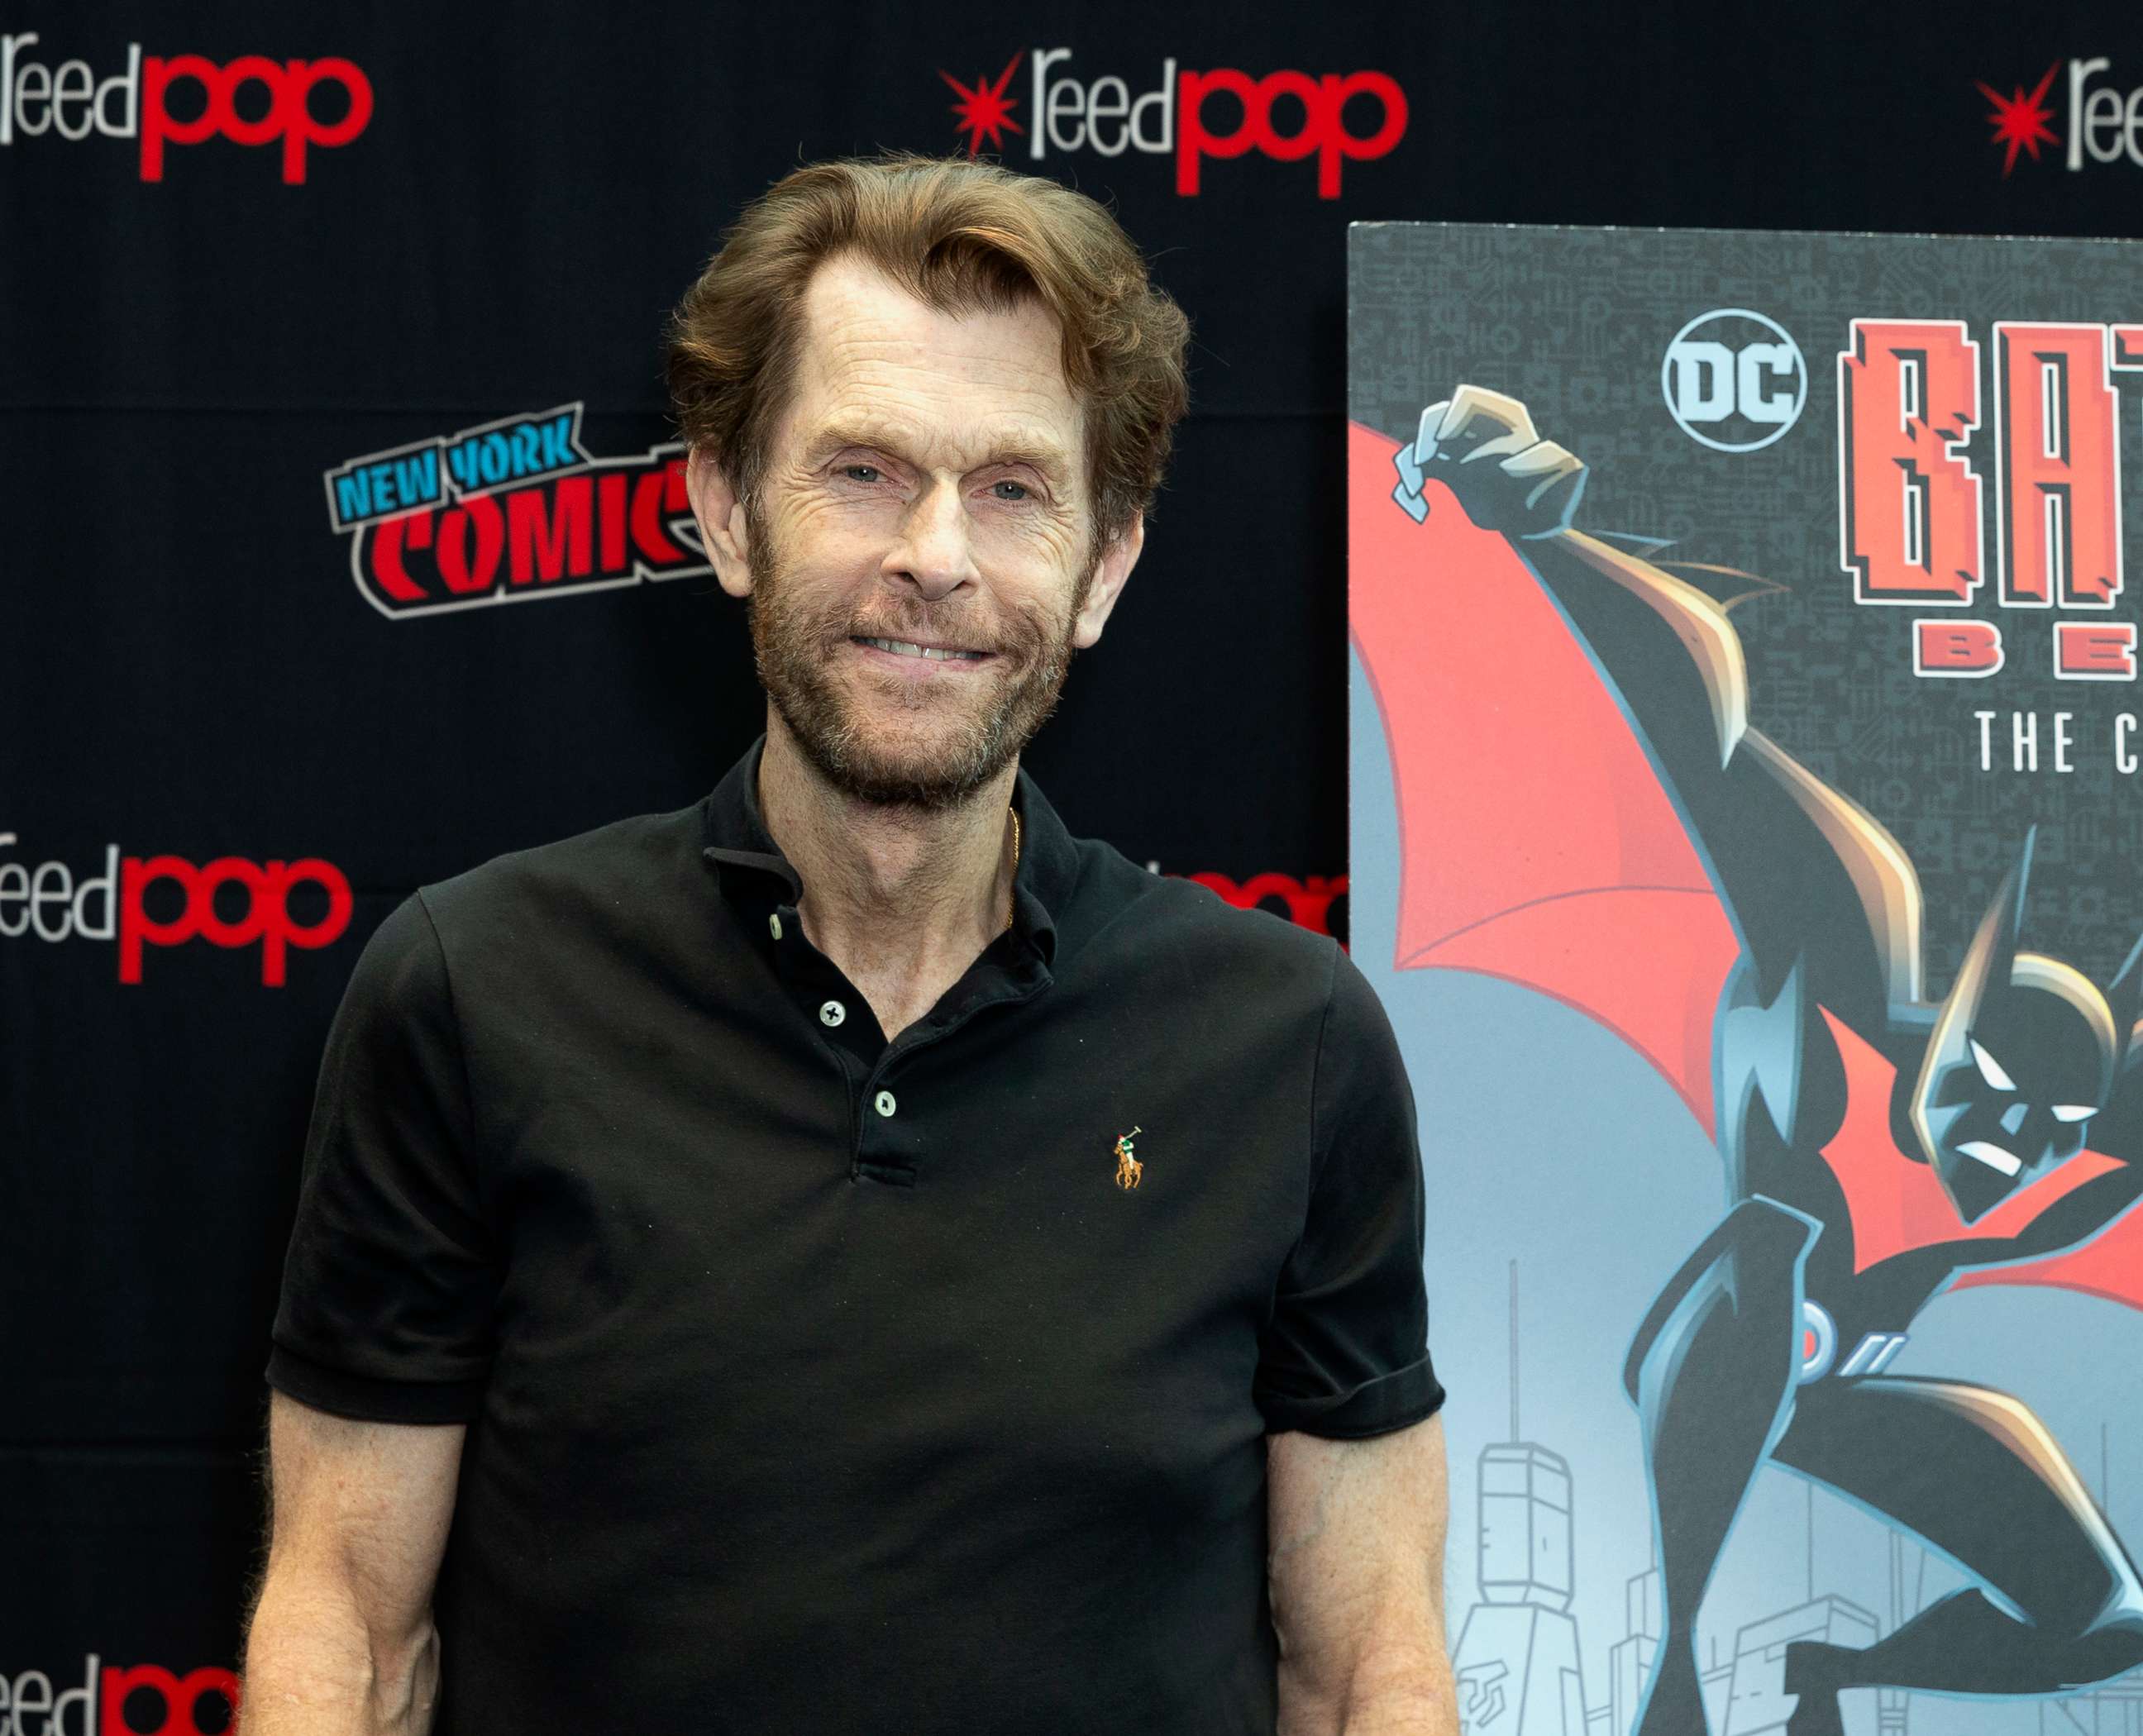 PHOTO: Kevin Conroy attends presser for Batman Beyond 20th Anniversary by Warner Brothers during New York Comic Con at Jacob Javits Center.